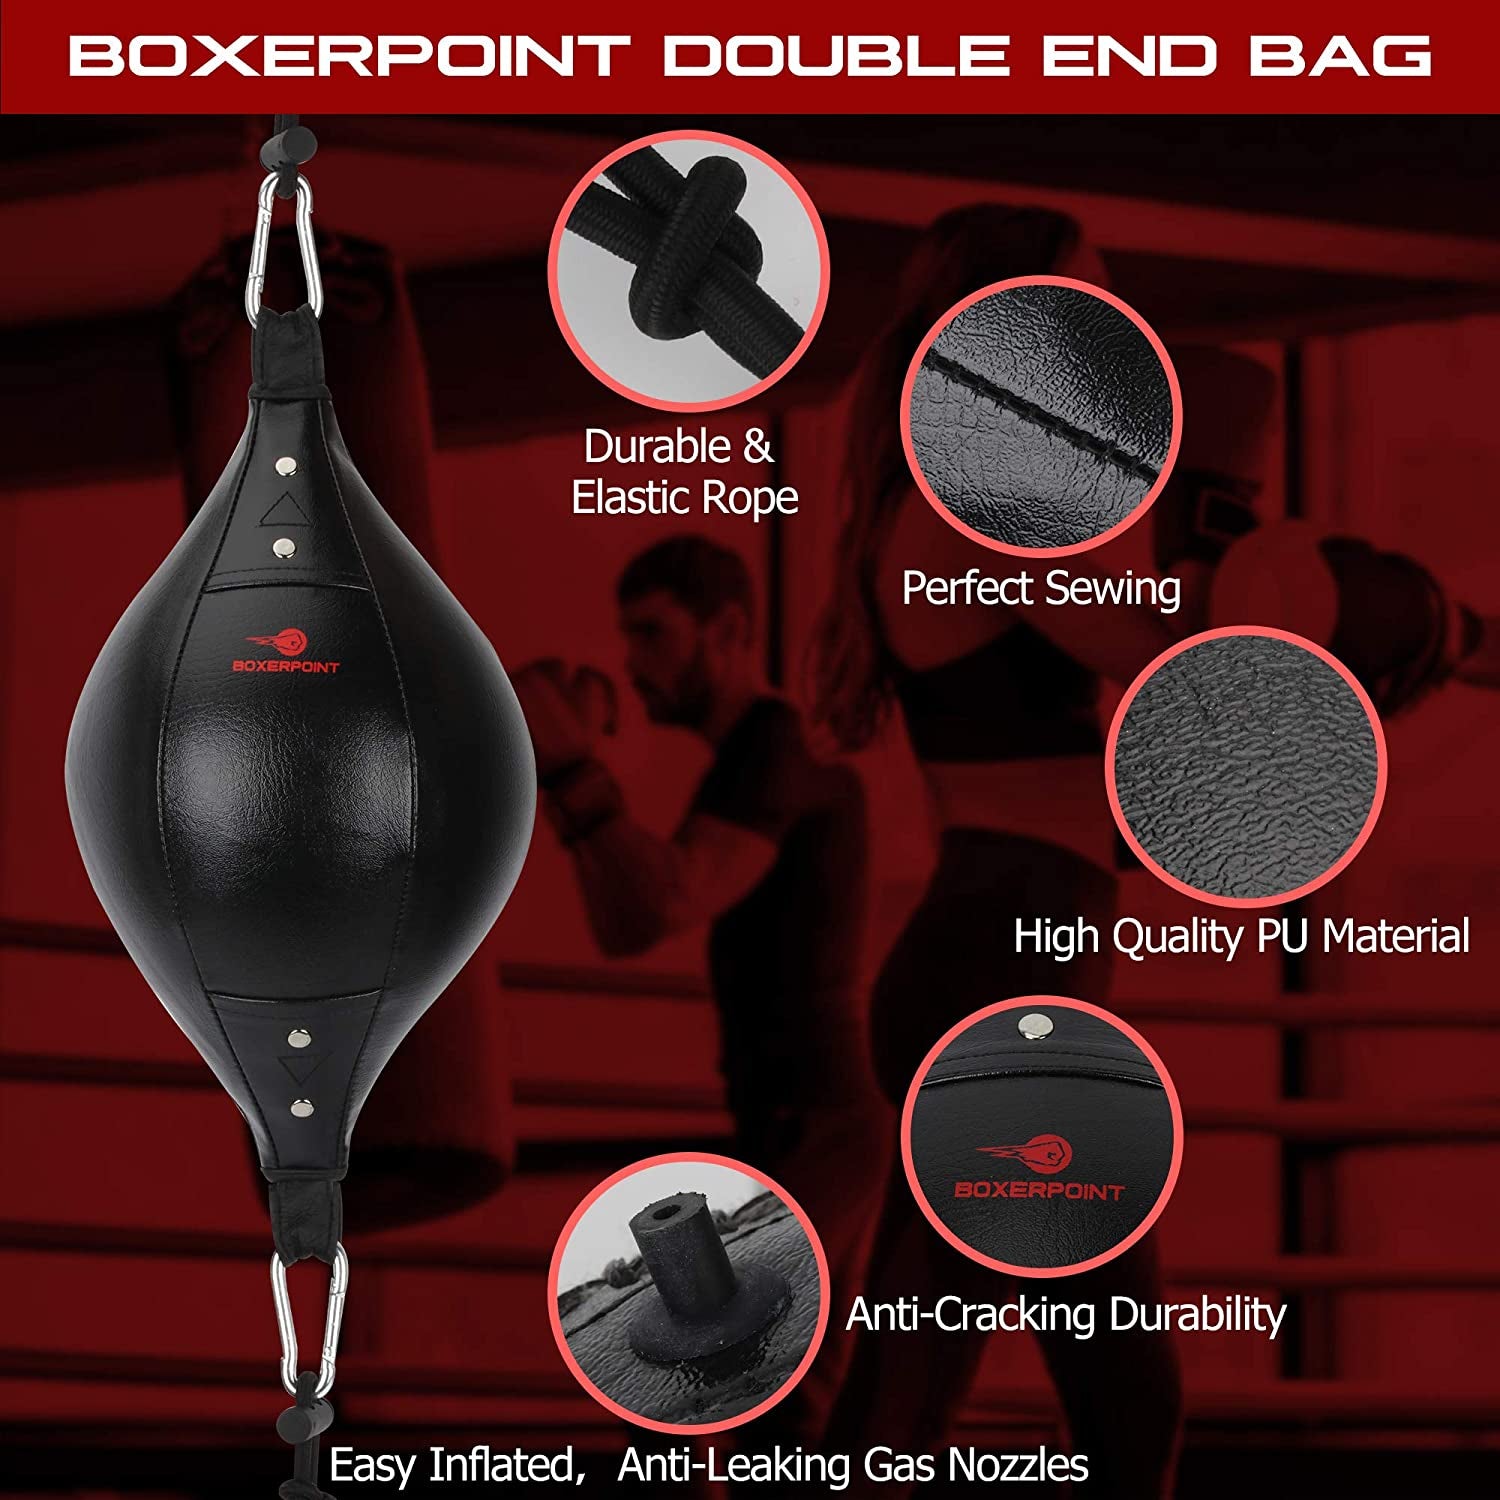 Boxerpoint Double End Punching Bag Kit | PU Leather, 2X41 Adjustable Cords, Hand Wraps, Carry Bag and Installation | Double End Bag Boxing Equipment for Home and Gym - Double End Boxing Bag Kit